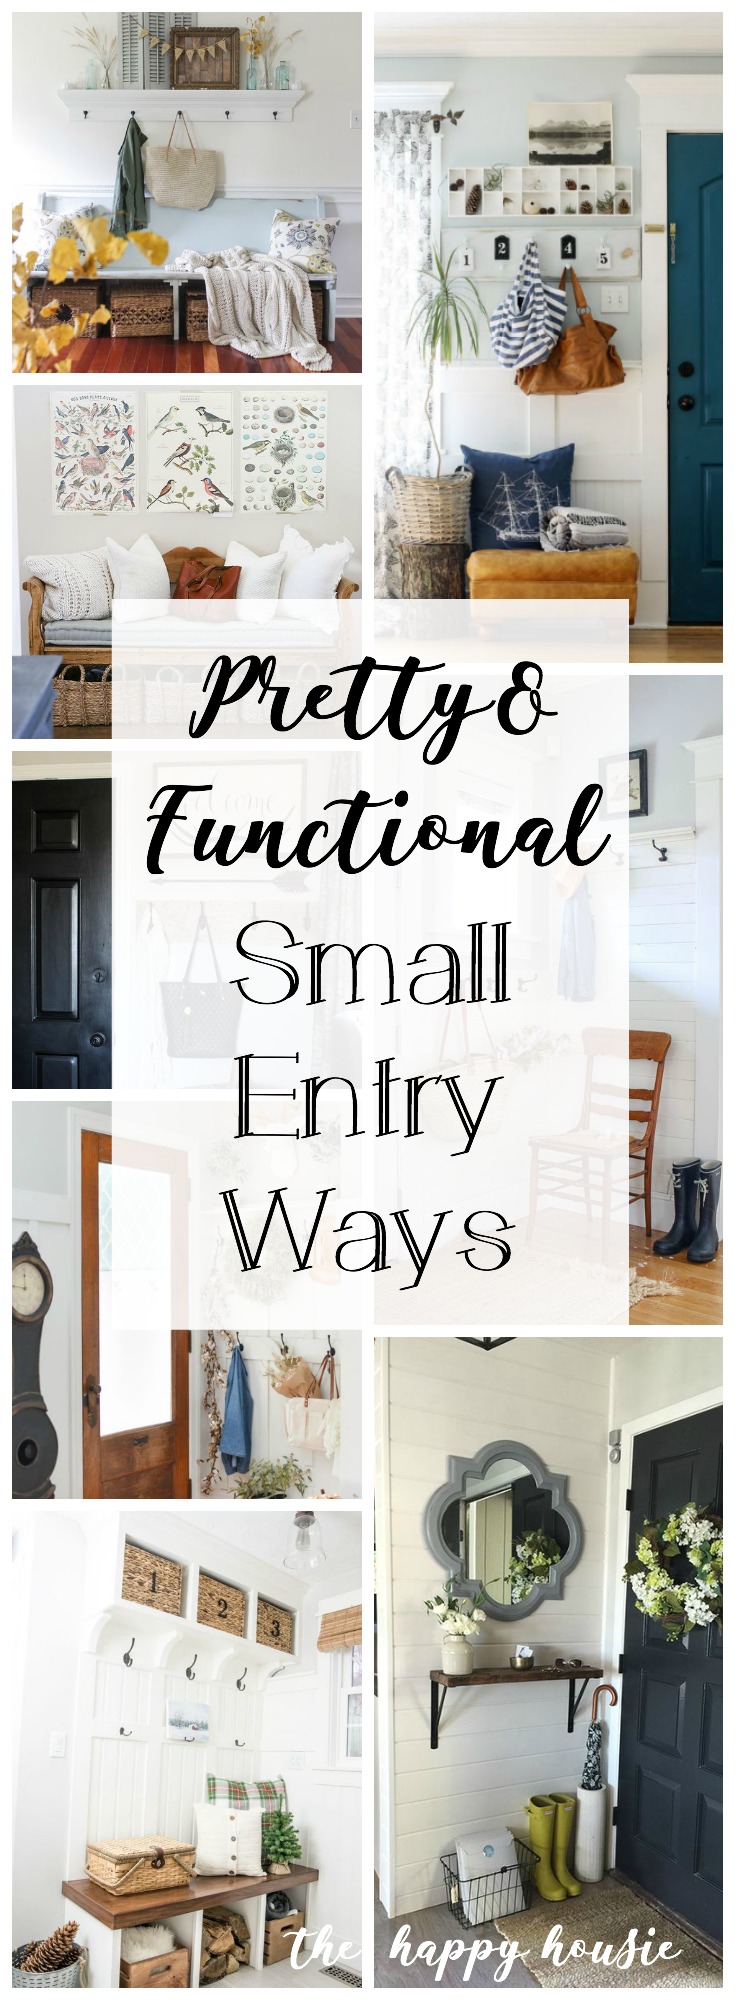 Entryway Ideas - 14 Functional Ways to Style Your Entryway